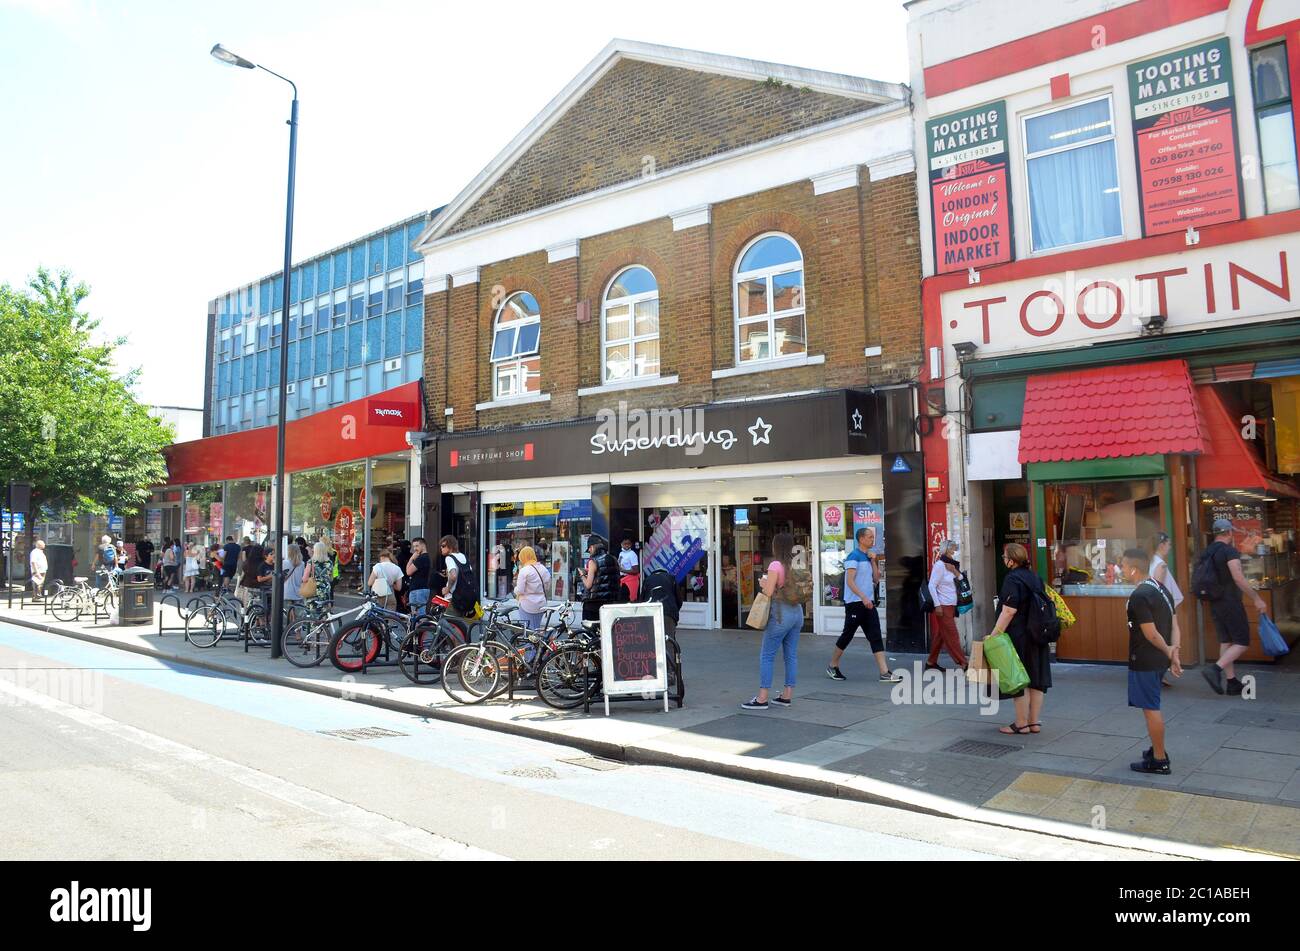 London, UK, 15 June Non essential shops open with queues in Tooting, South  London. Queue for TK max. Credit: JOHNNY ARMSTEAD/Alamy Live News Stock  Photo - Alamy